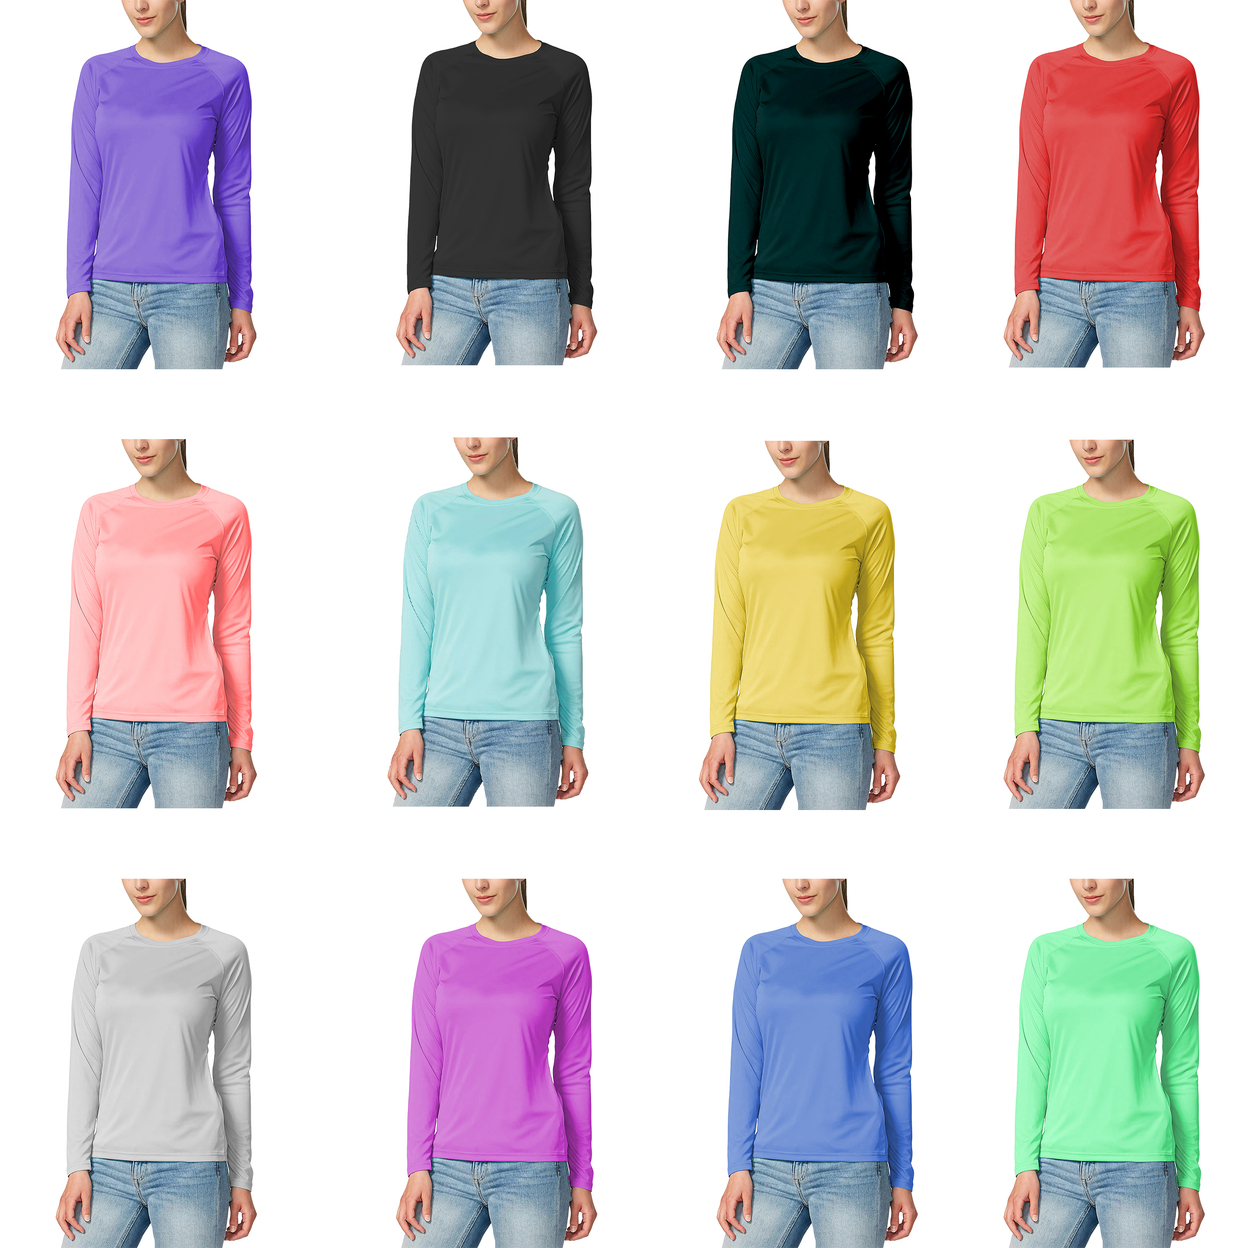 5-Pack: Women's Dri-Fit Moisture-Wicking Breathable Long Sleeve T-Shirt - Large